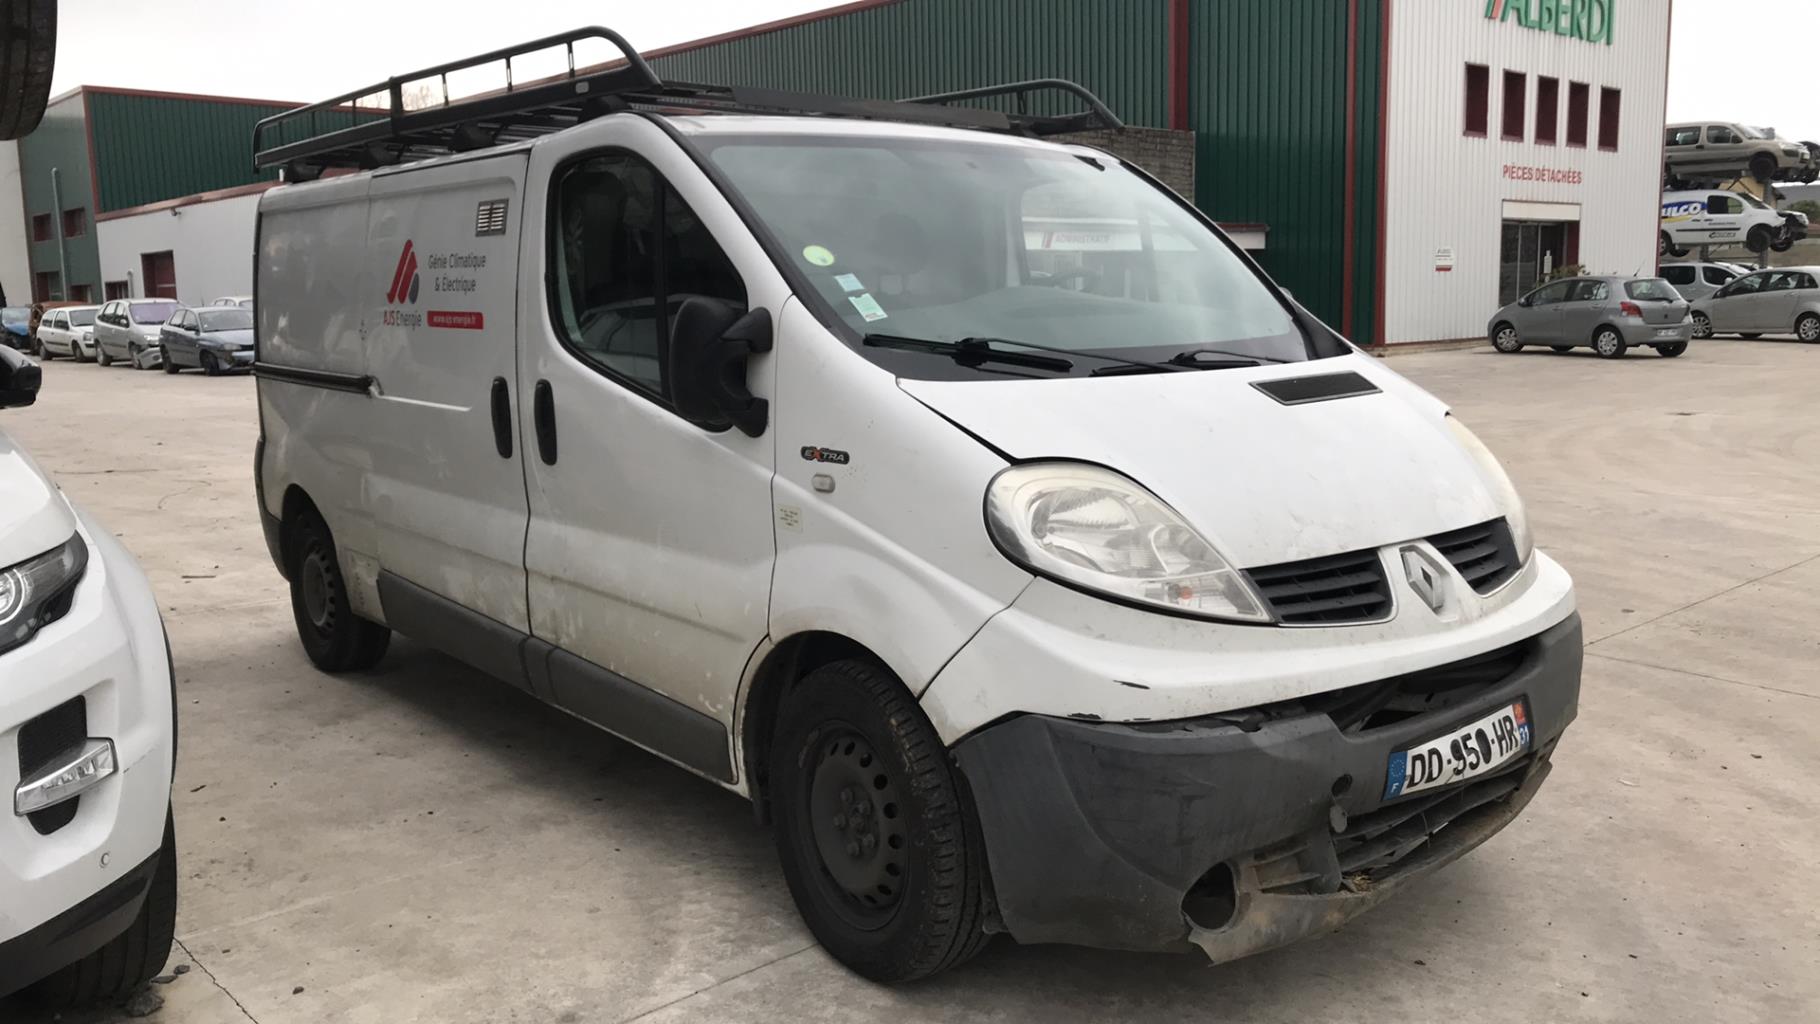 Vente voiture d'occasion : Renault Trafic 2 phase 2 2.0 dci - 16v turbo